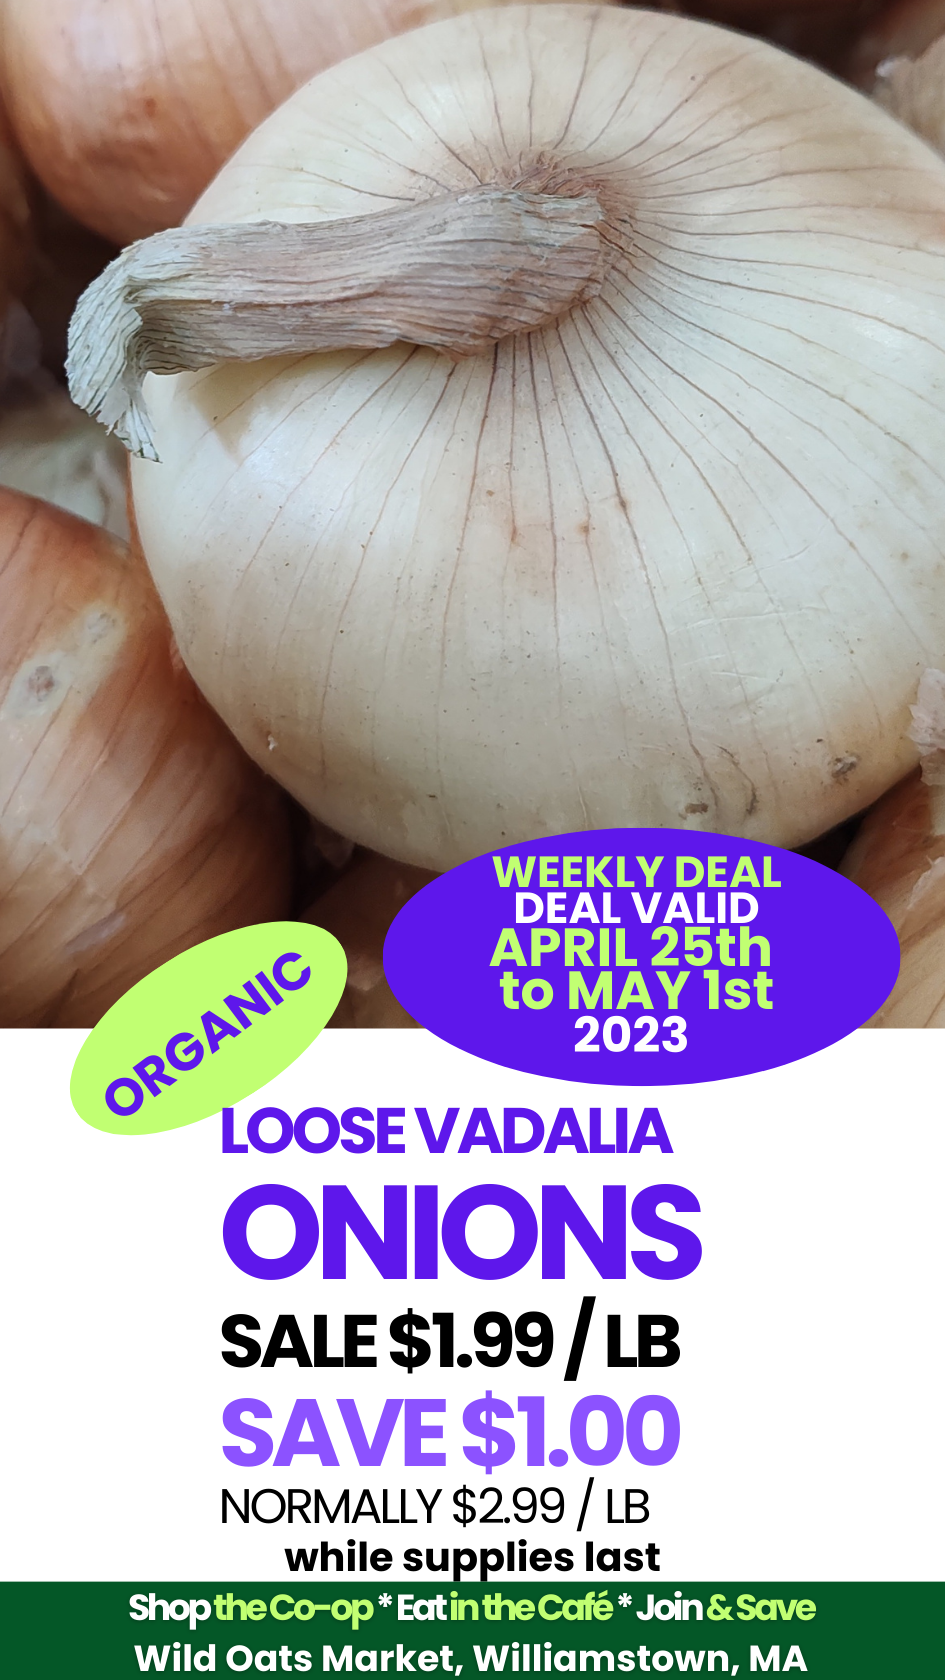 Wild Oats Market Weekly Update APR 28 to MAY ORGANIC LOOSE VADALIA ONIONS.png